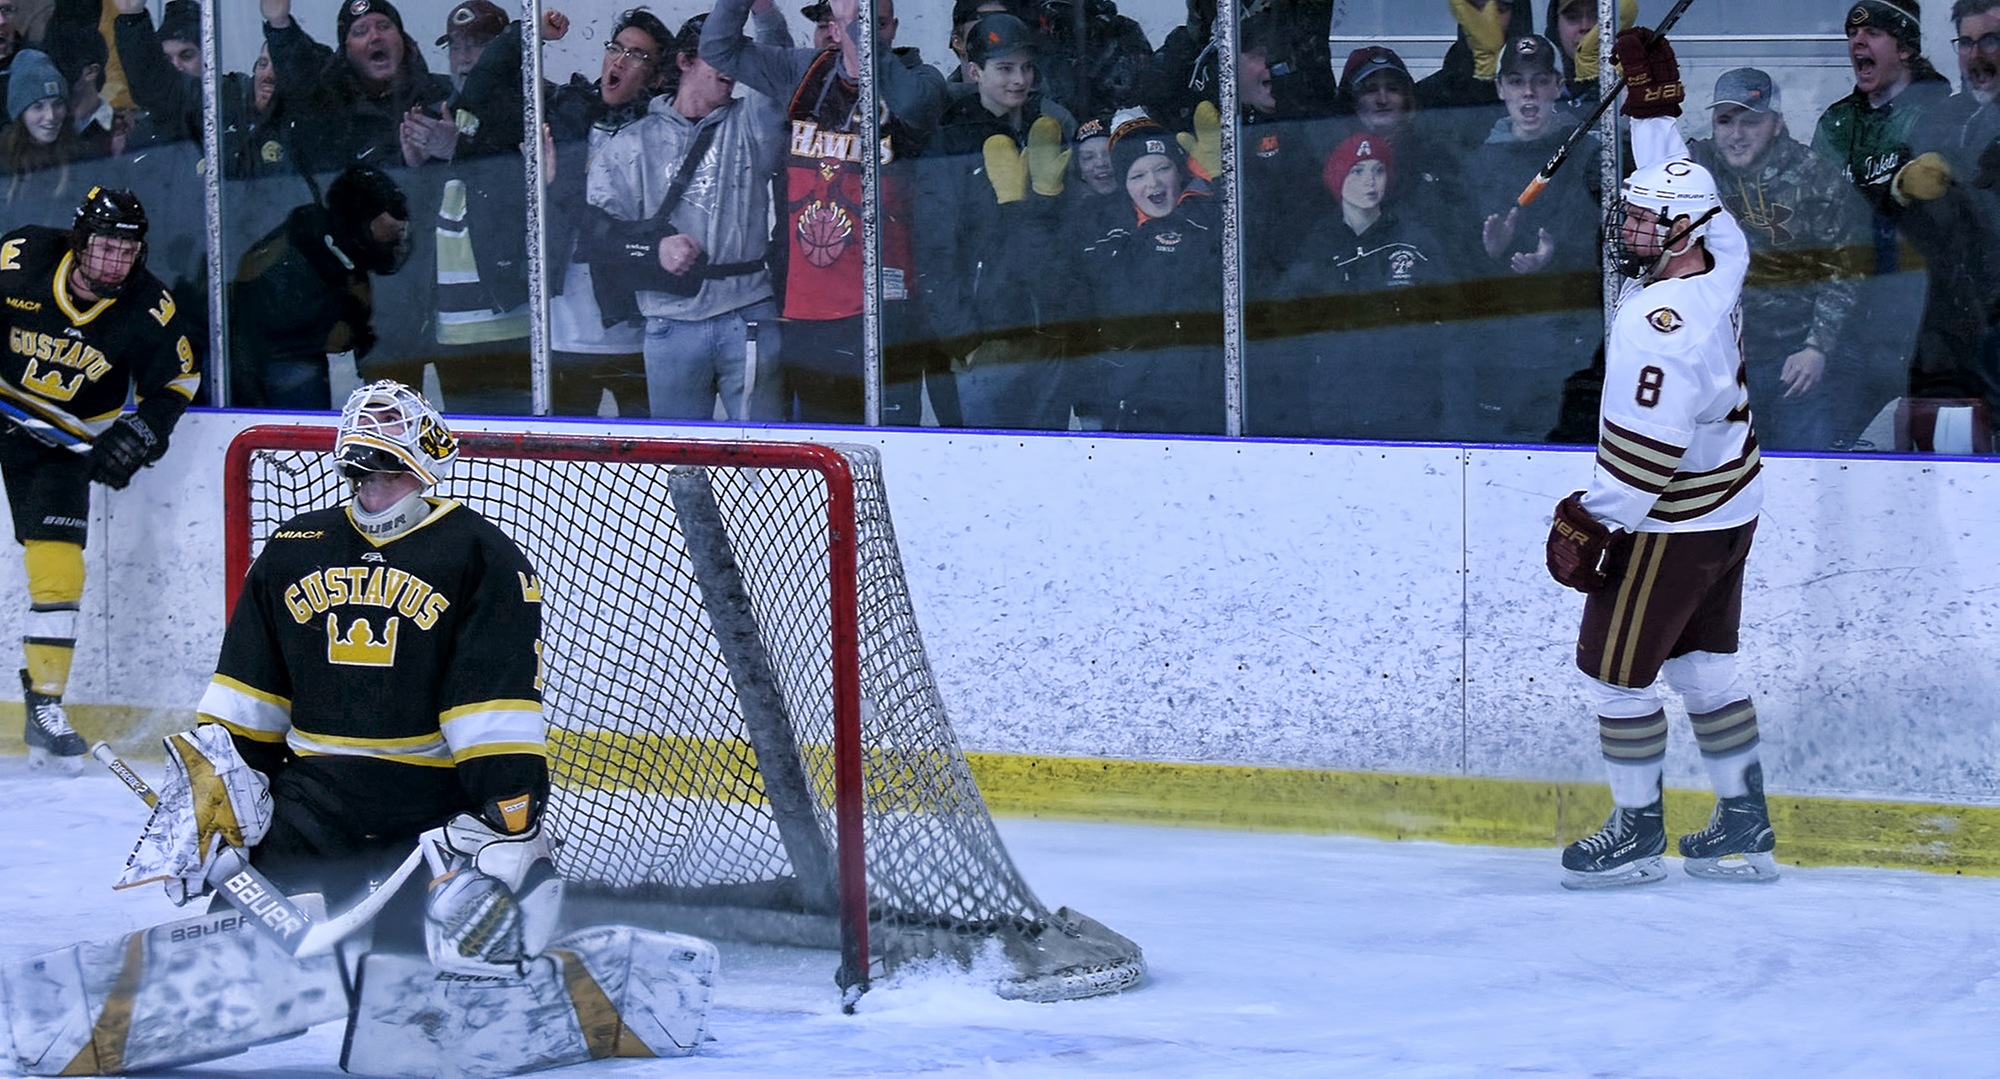 Aaron Herdt celebrates his game-winning goal with only 4-seconds left in overtime as Concordia beat Gustavus to clinch a spot in the MIAC playoffs.